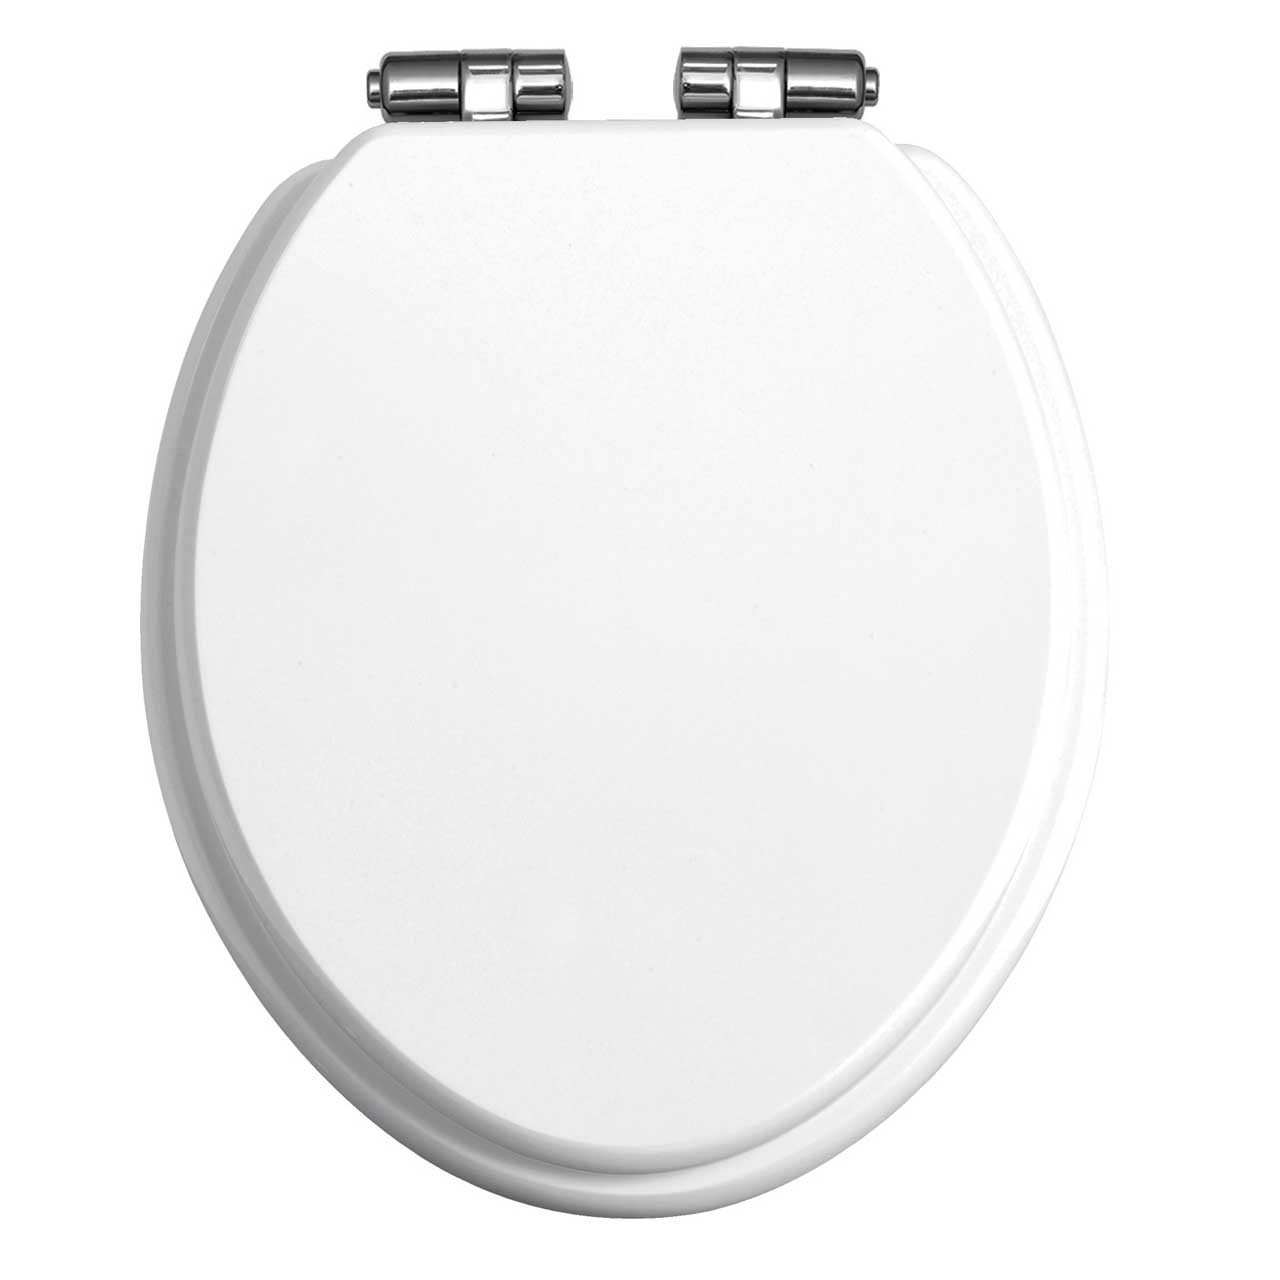 Photograph of Toilet Seat Soft Close Chrome Hinges White Gloss